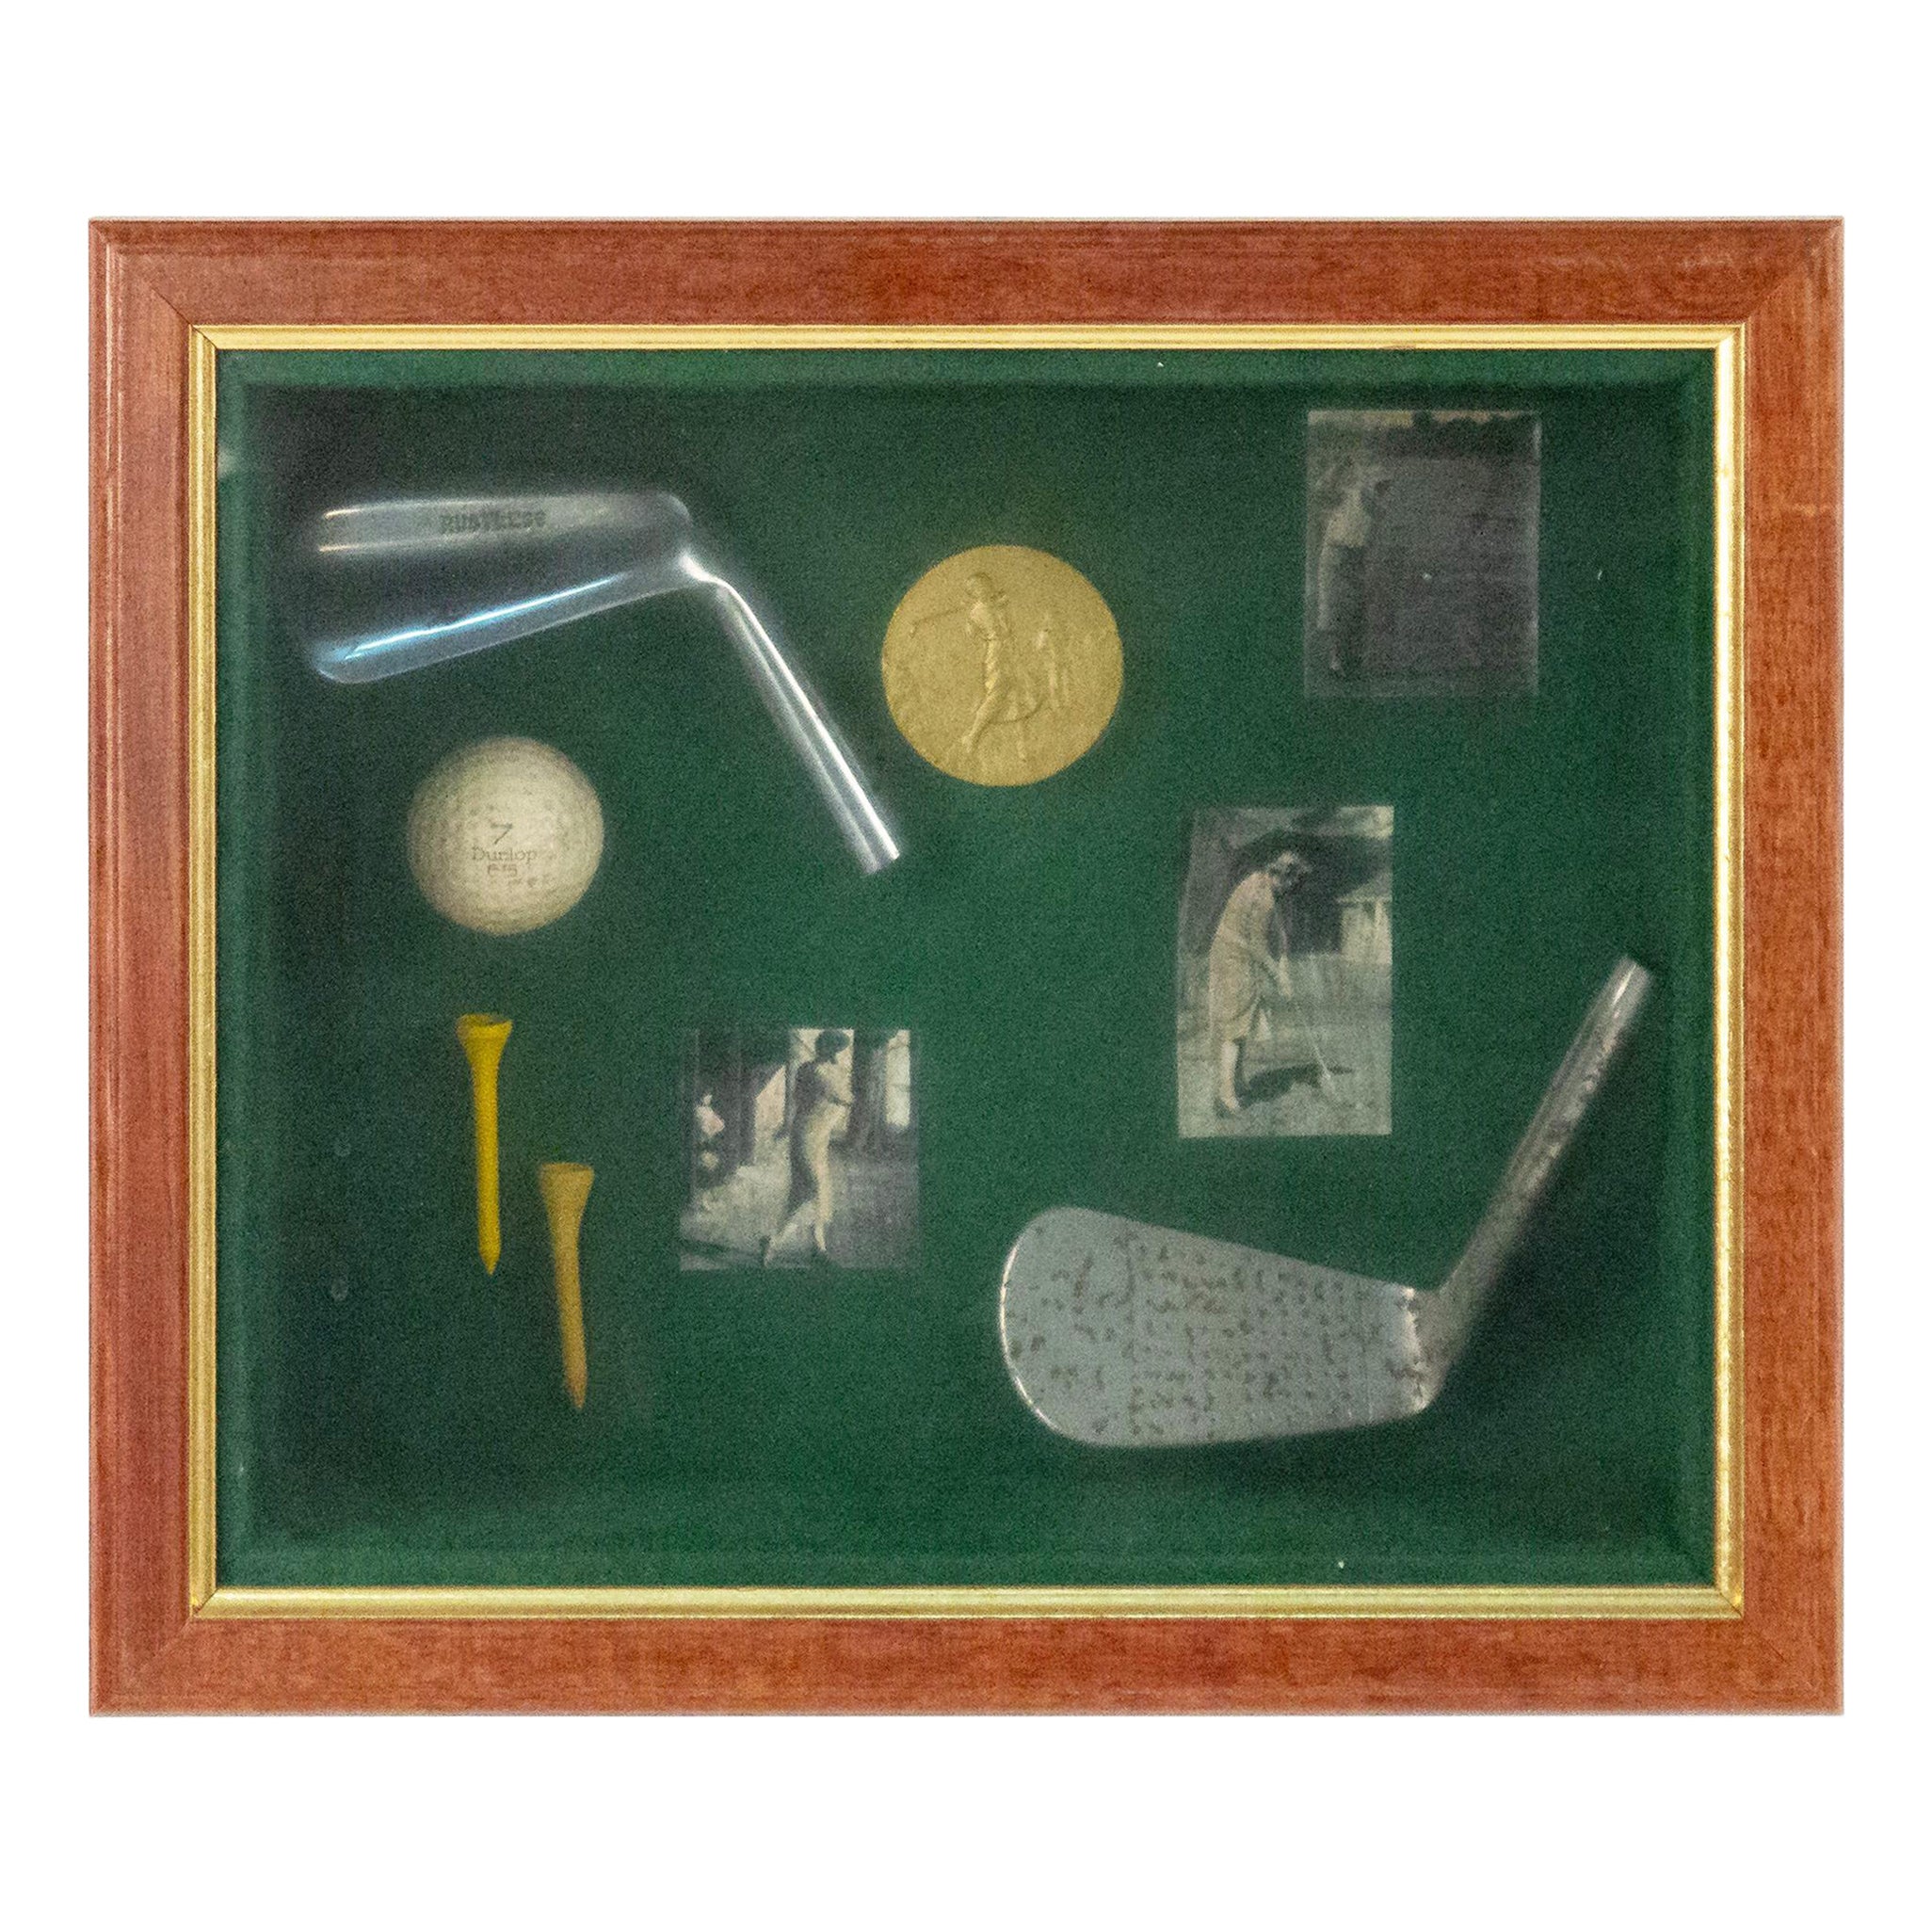 20th Century Assemblage English Golf Display Case Wall Plaque